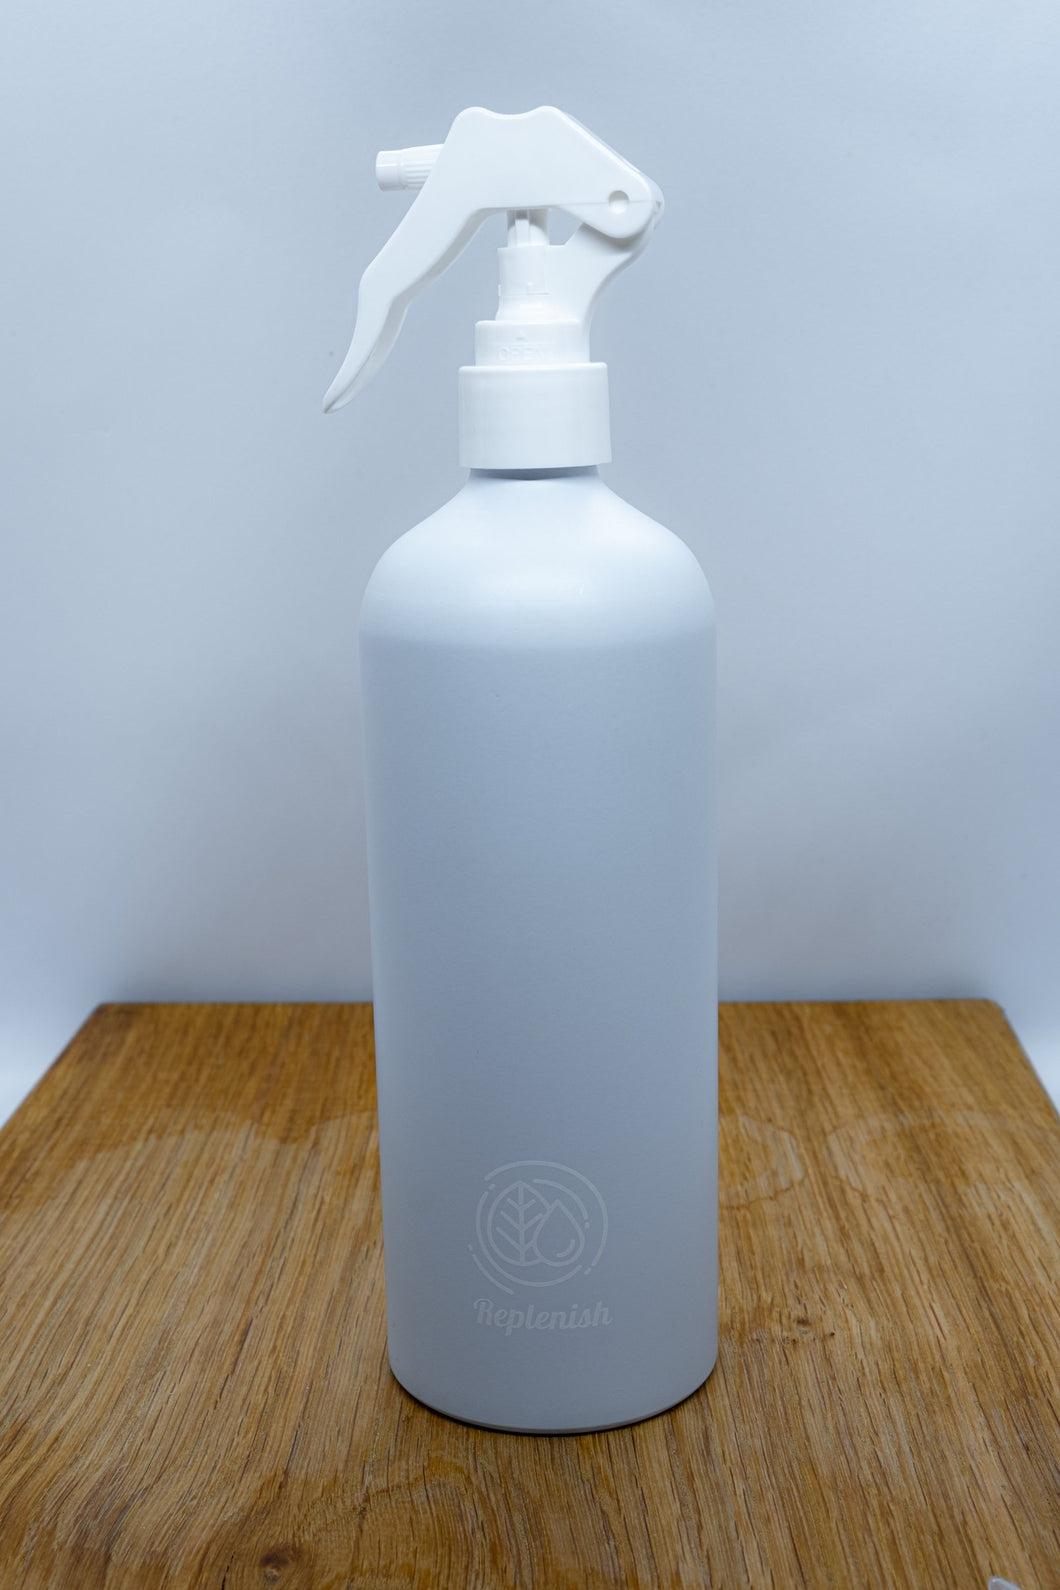 Replenish Bottle with White Mini Trigger Spray filled with 500ml of Miniml Cleaning Product